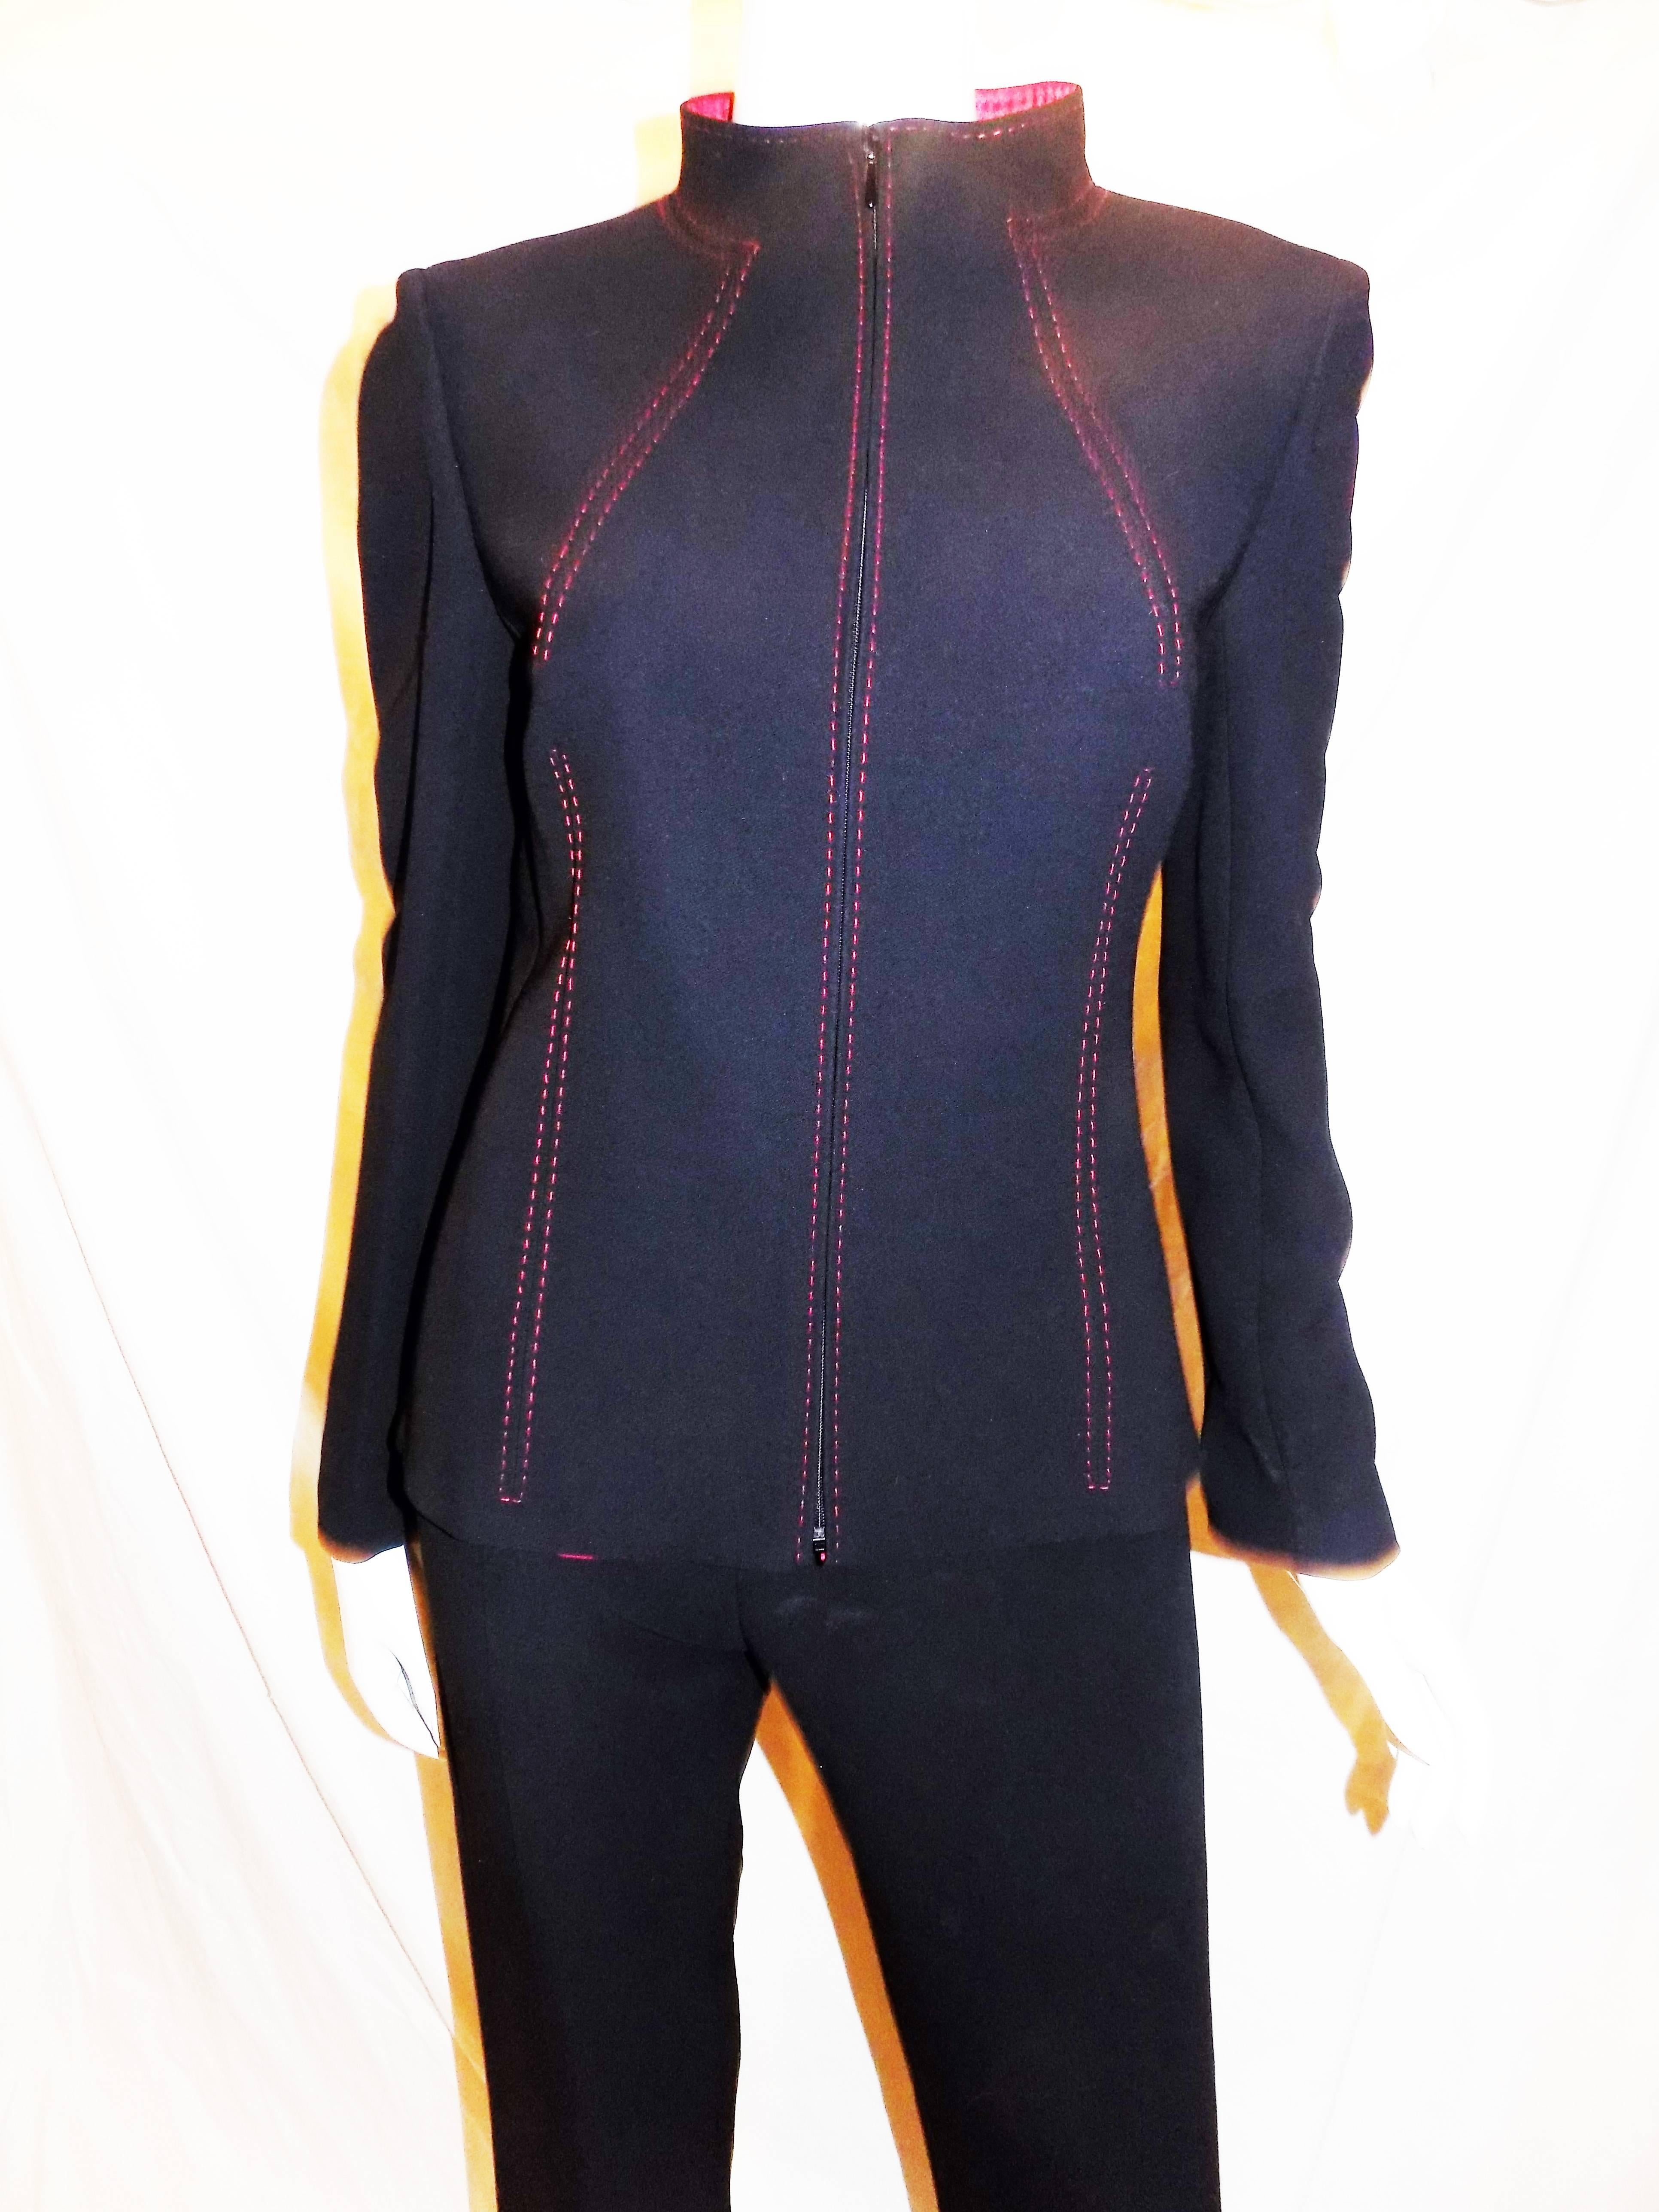 Beautiful light wool navy pant suit by Valentino. Featuring red silk lining, red top stitching and zipper front closure. Pants are not hemmed since it is new piece. Perfect spring - summer suit.  Marked size 8. Measurements are: Pants waist 28